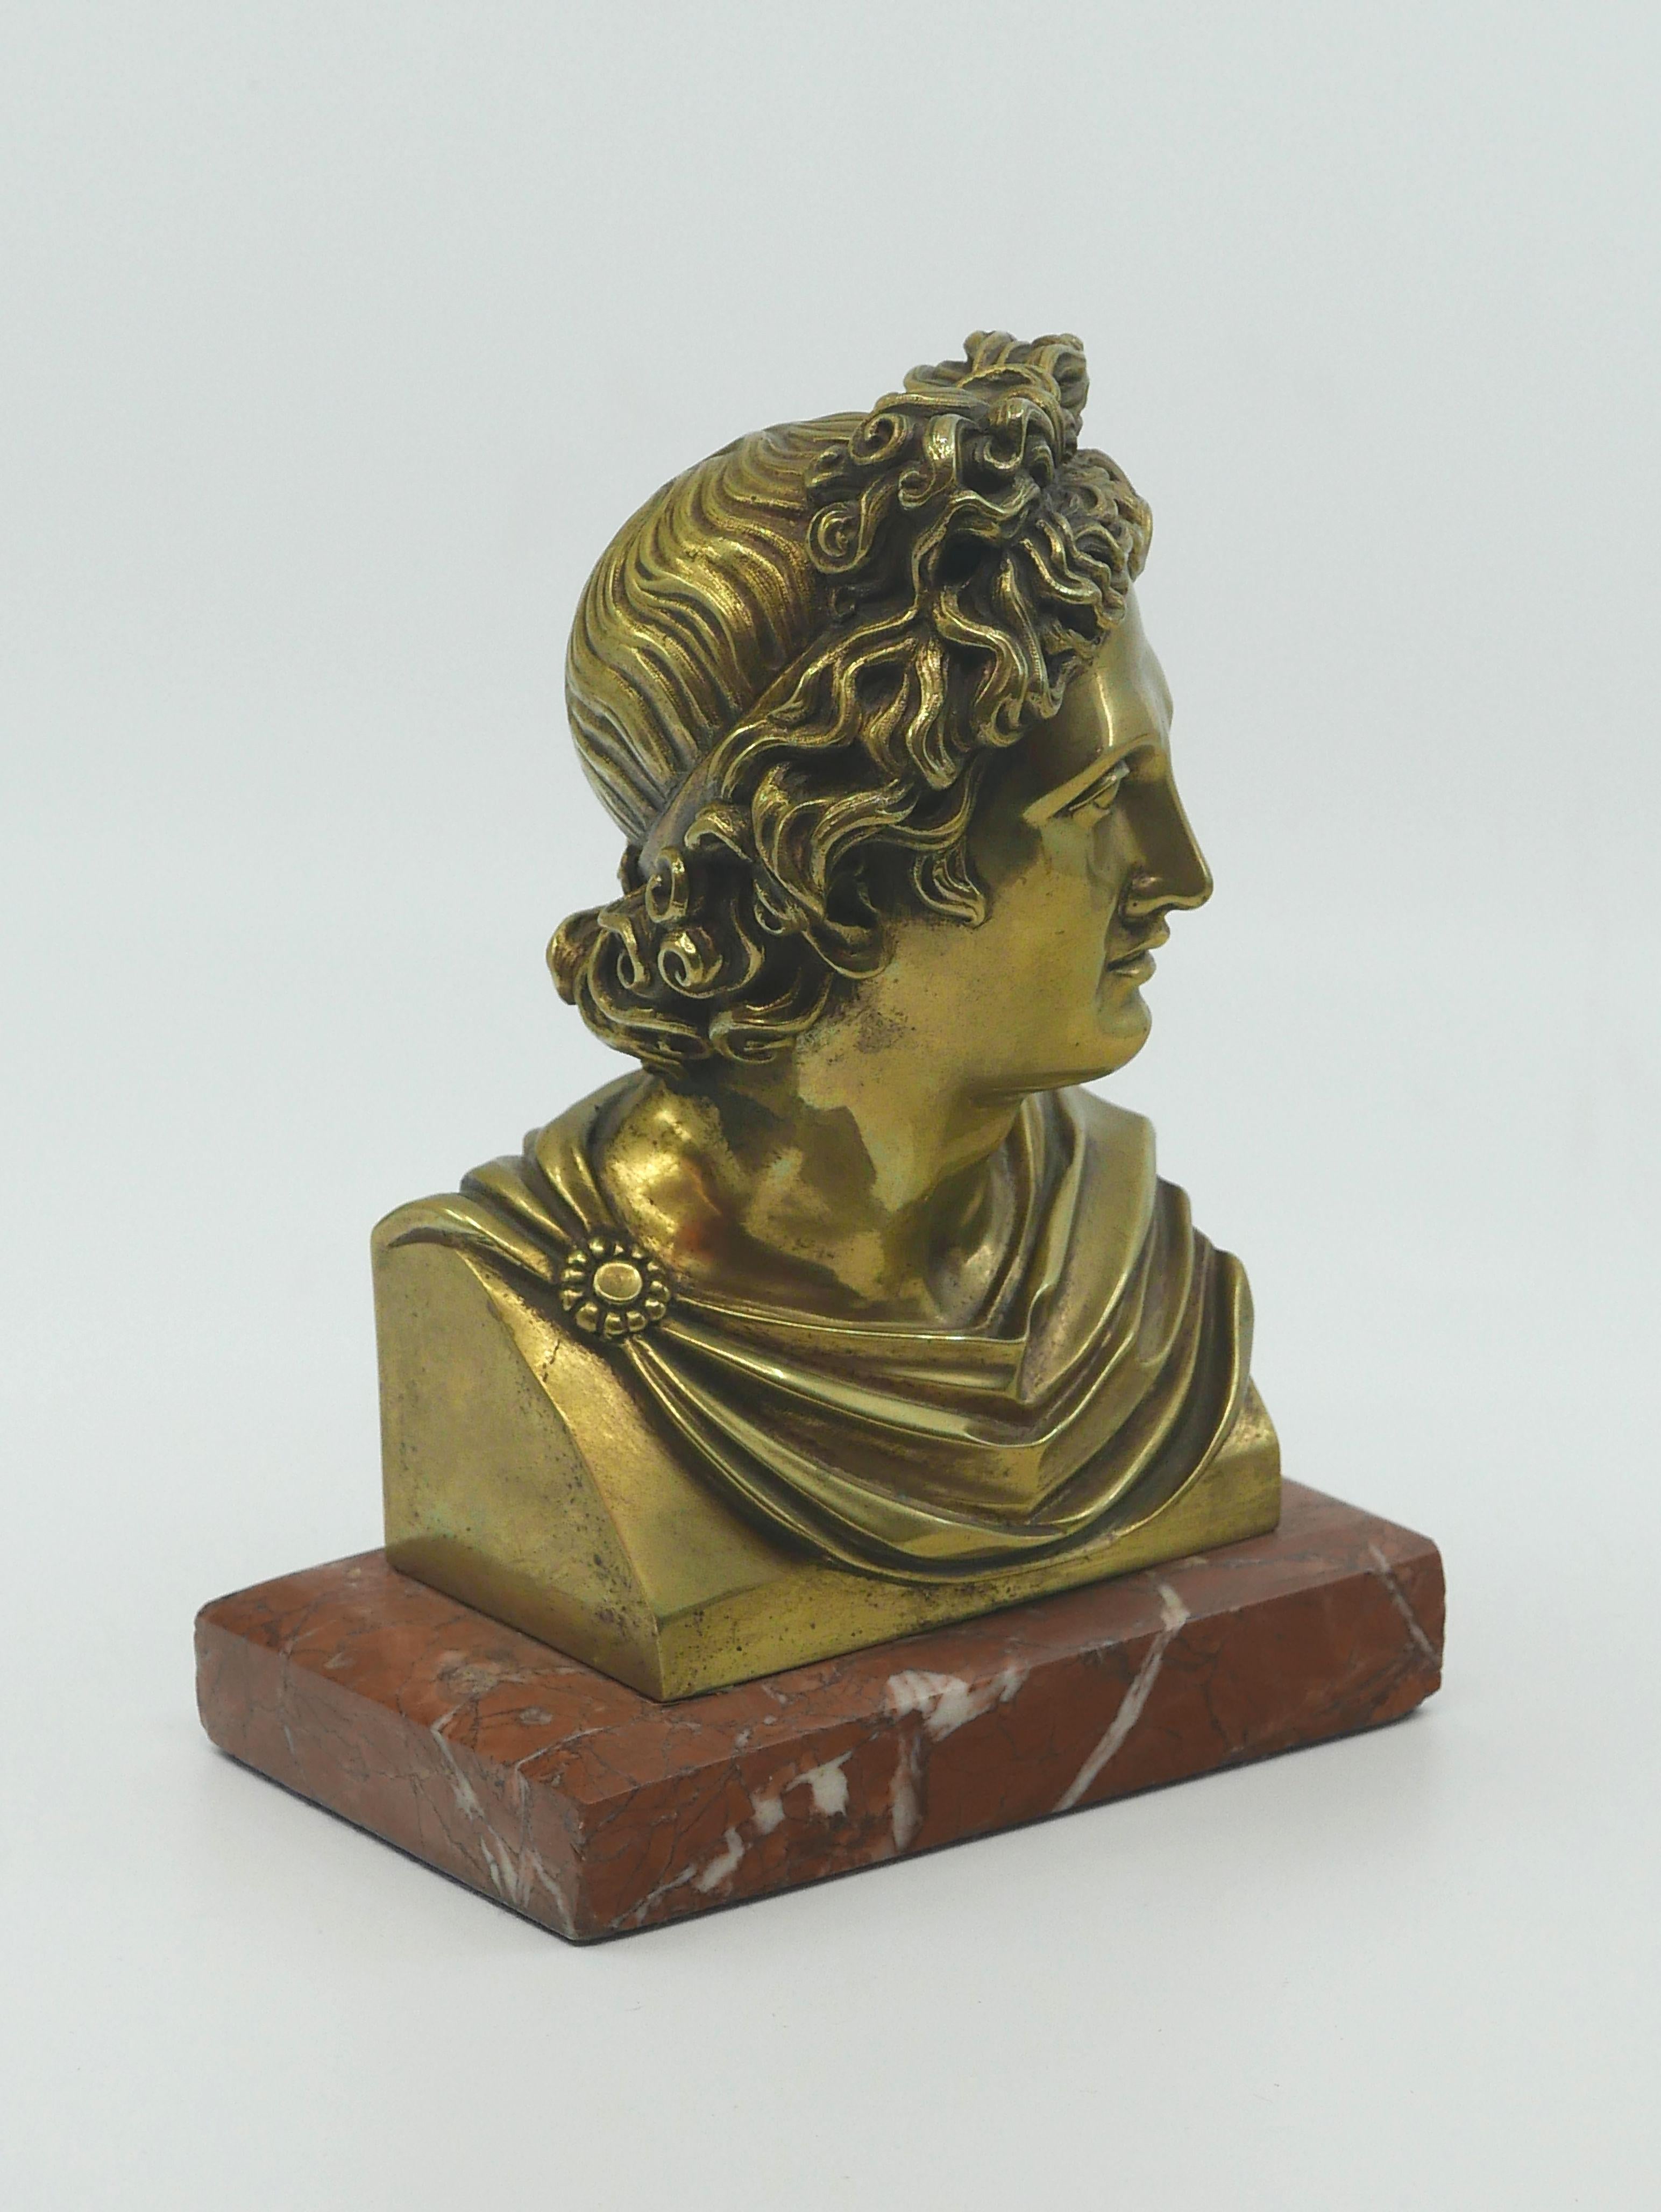 A wonderful polished bronze bust on a marble base, perfect for a curio cabinet, desk or bookshelf. so many places this would look stunning. The casting and chasing of this bronze is nearly perfect and what is not to love about the old label on the